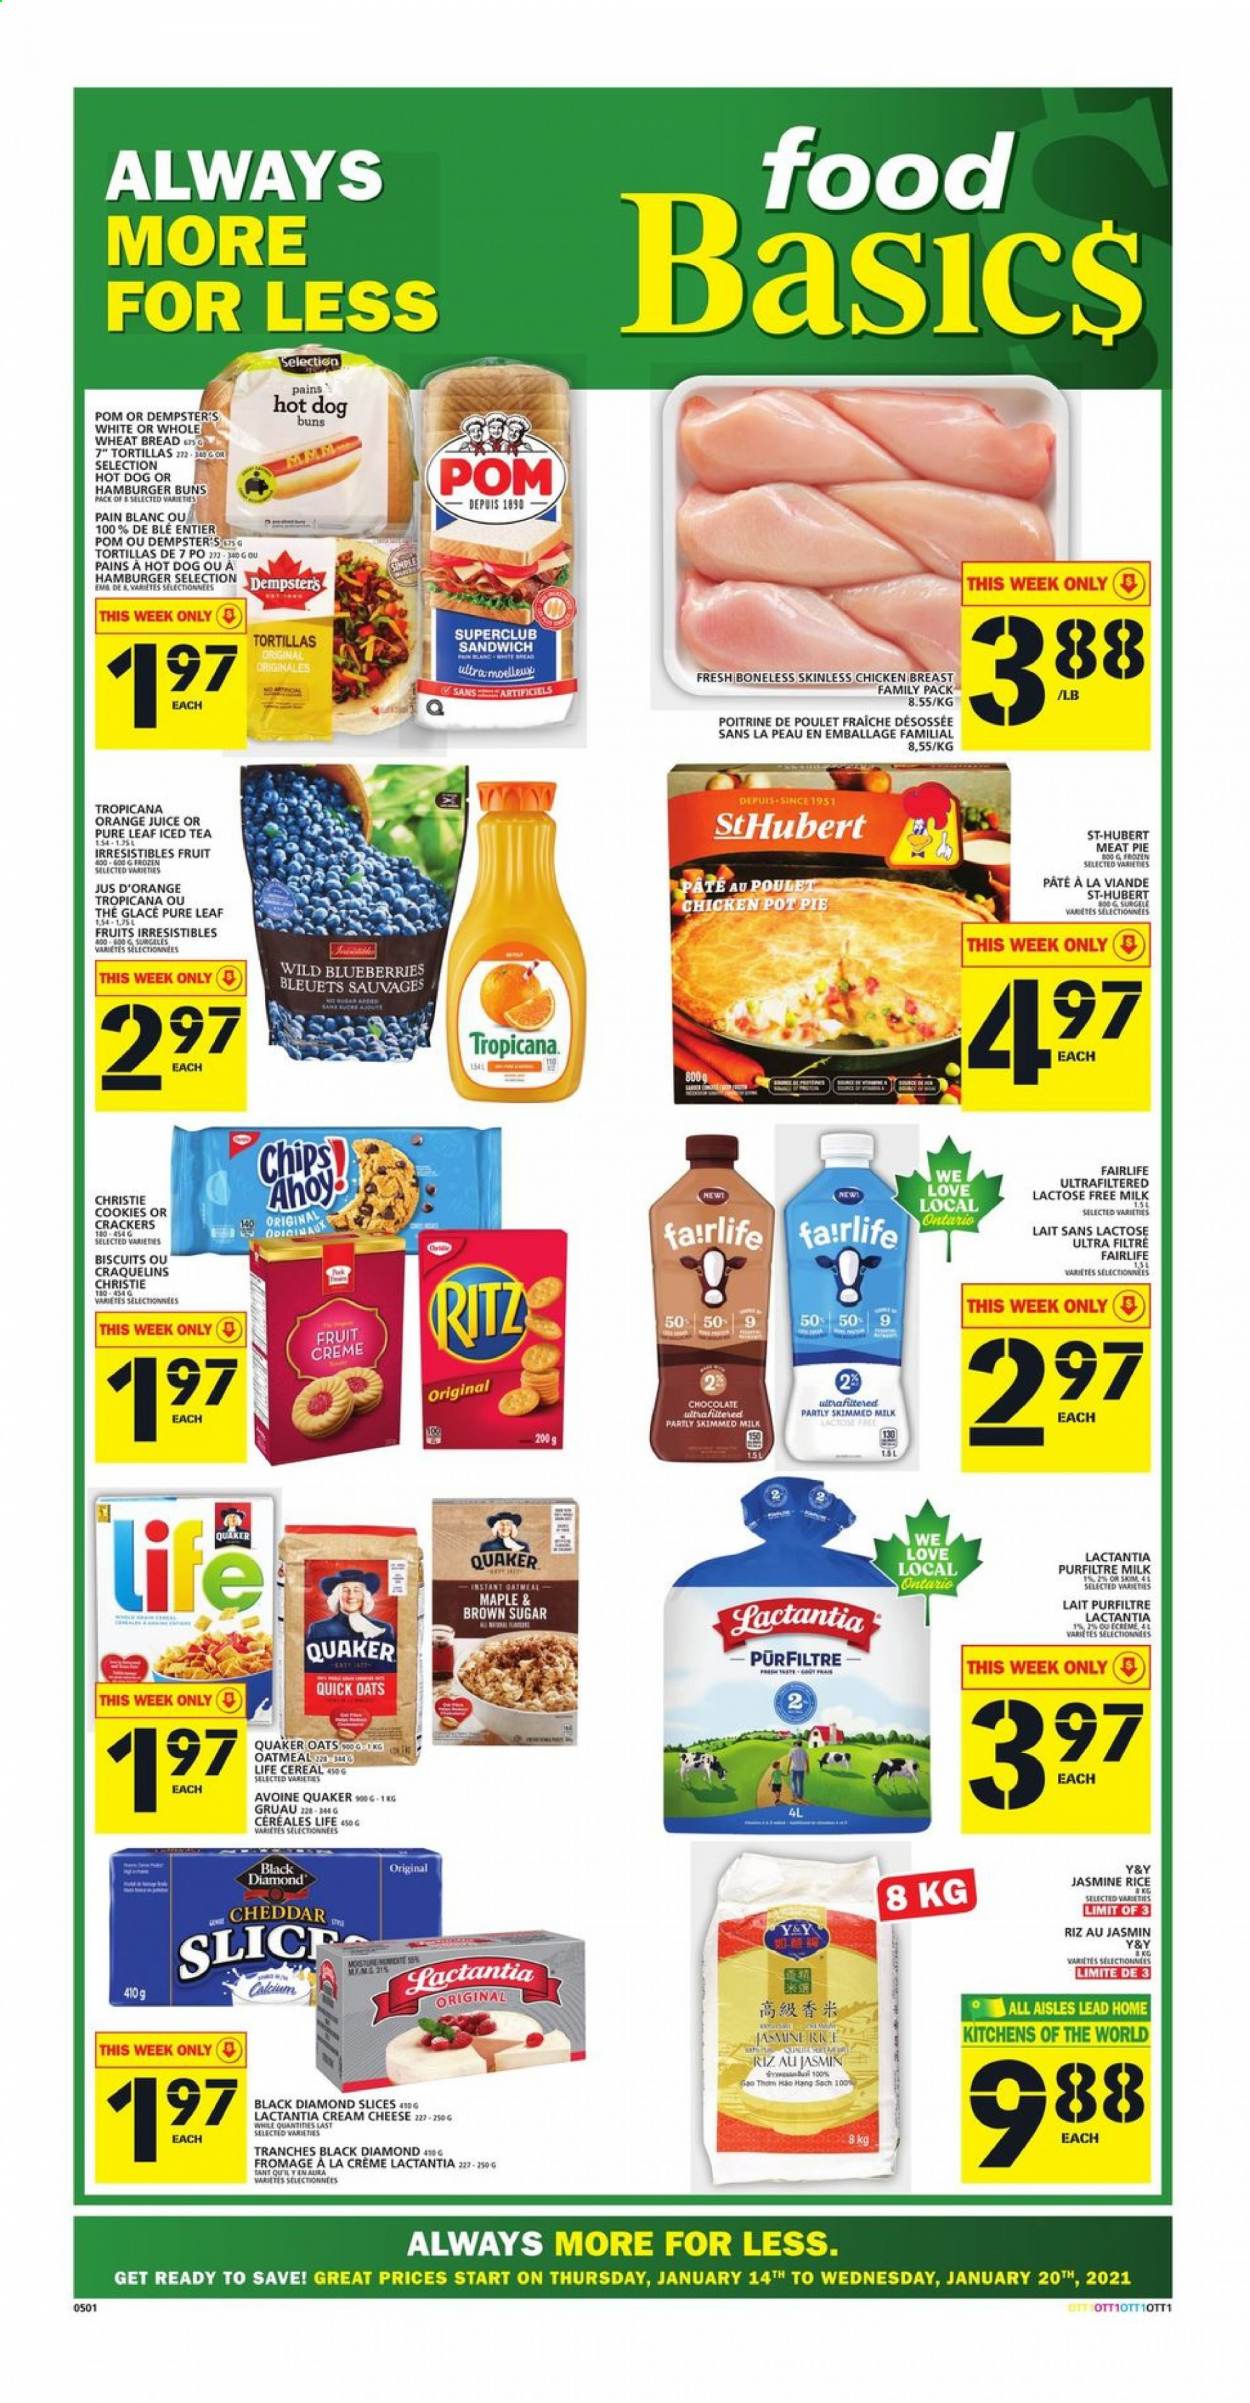 thumbnail - Food Basics Flyer - January 14, 2021 - January 20, 2021 - Sales products - tortillas, wheat bread, pie, buns, burger buns, pot pie, blueberries, hot dog, sandwich, Quaker, cream cheese, cheese, milk, lactose free milk, cookies, chocolate, crackers, biscuit, RITZ, oatmeal, oats, cereals, Quick Oats, rice, jasmine rice, orange juice, juice, ice tea, Pure Leaf, chicken breasts, chicken, pot. Page 1.